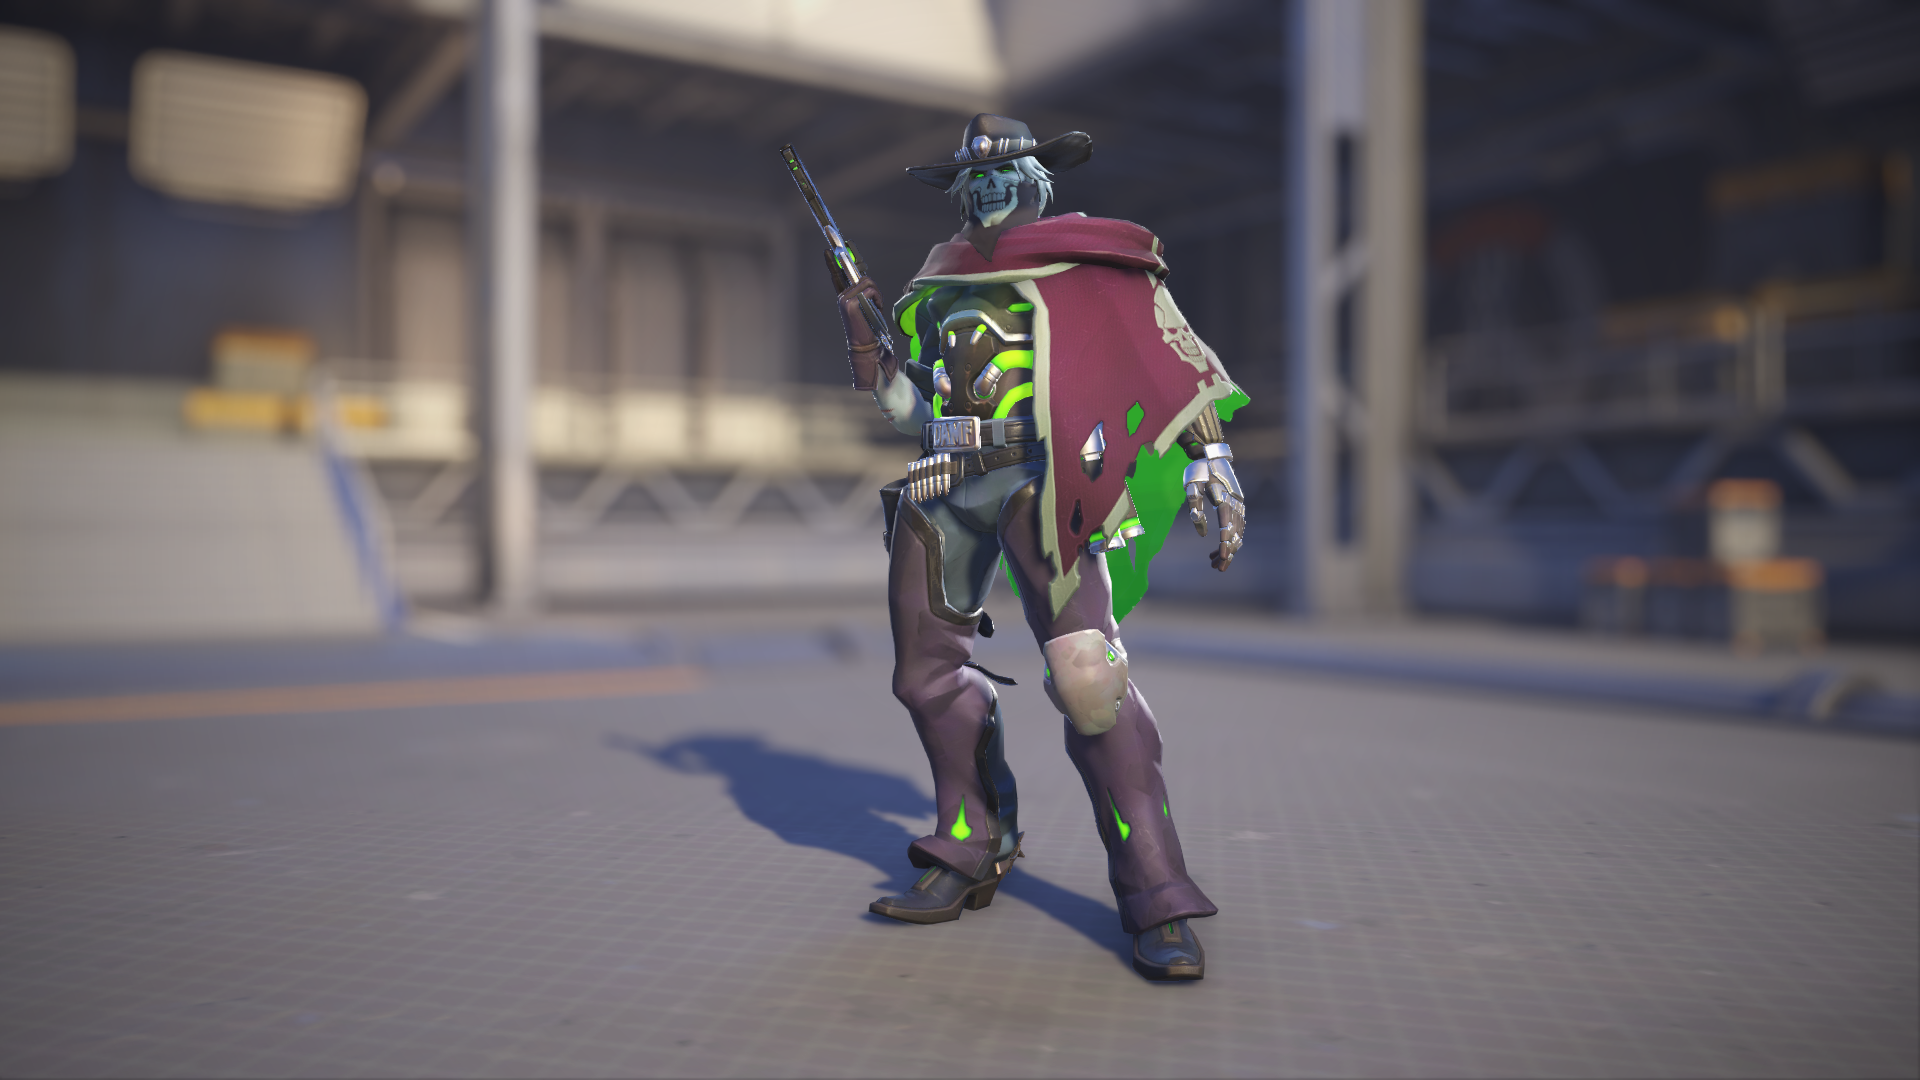 Cassidy models his Undead skin in Overwatch 2.